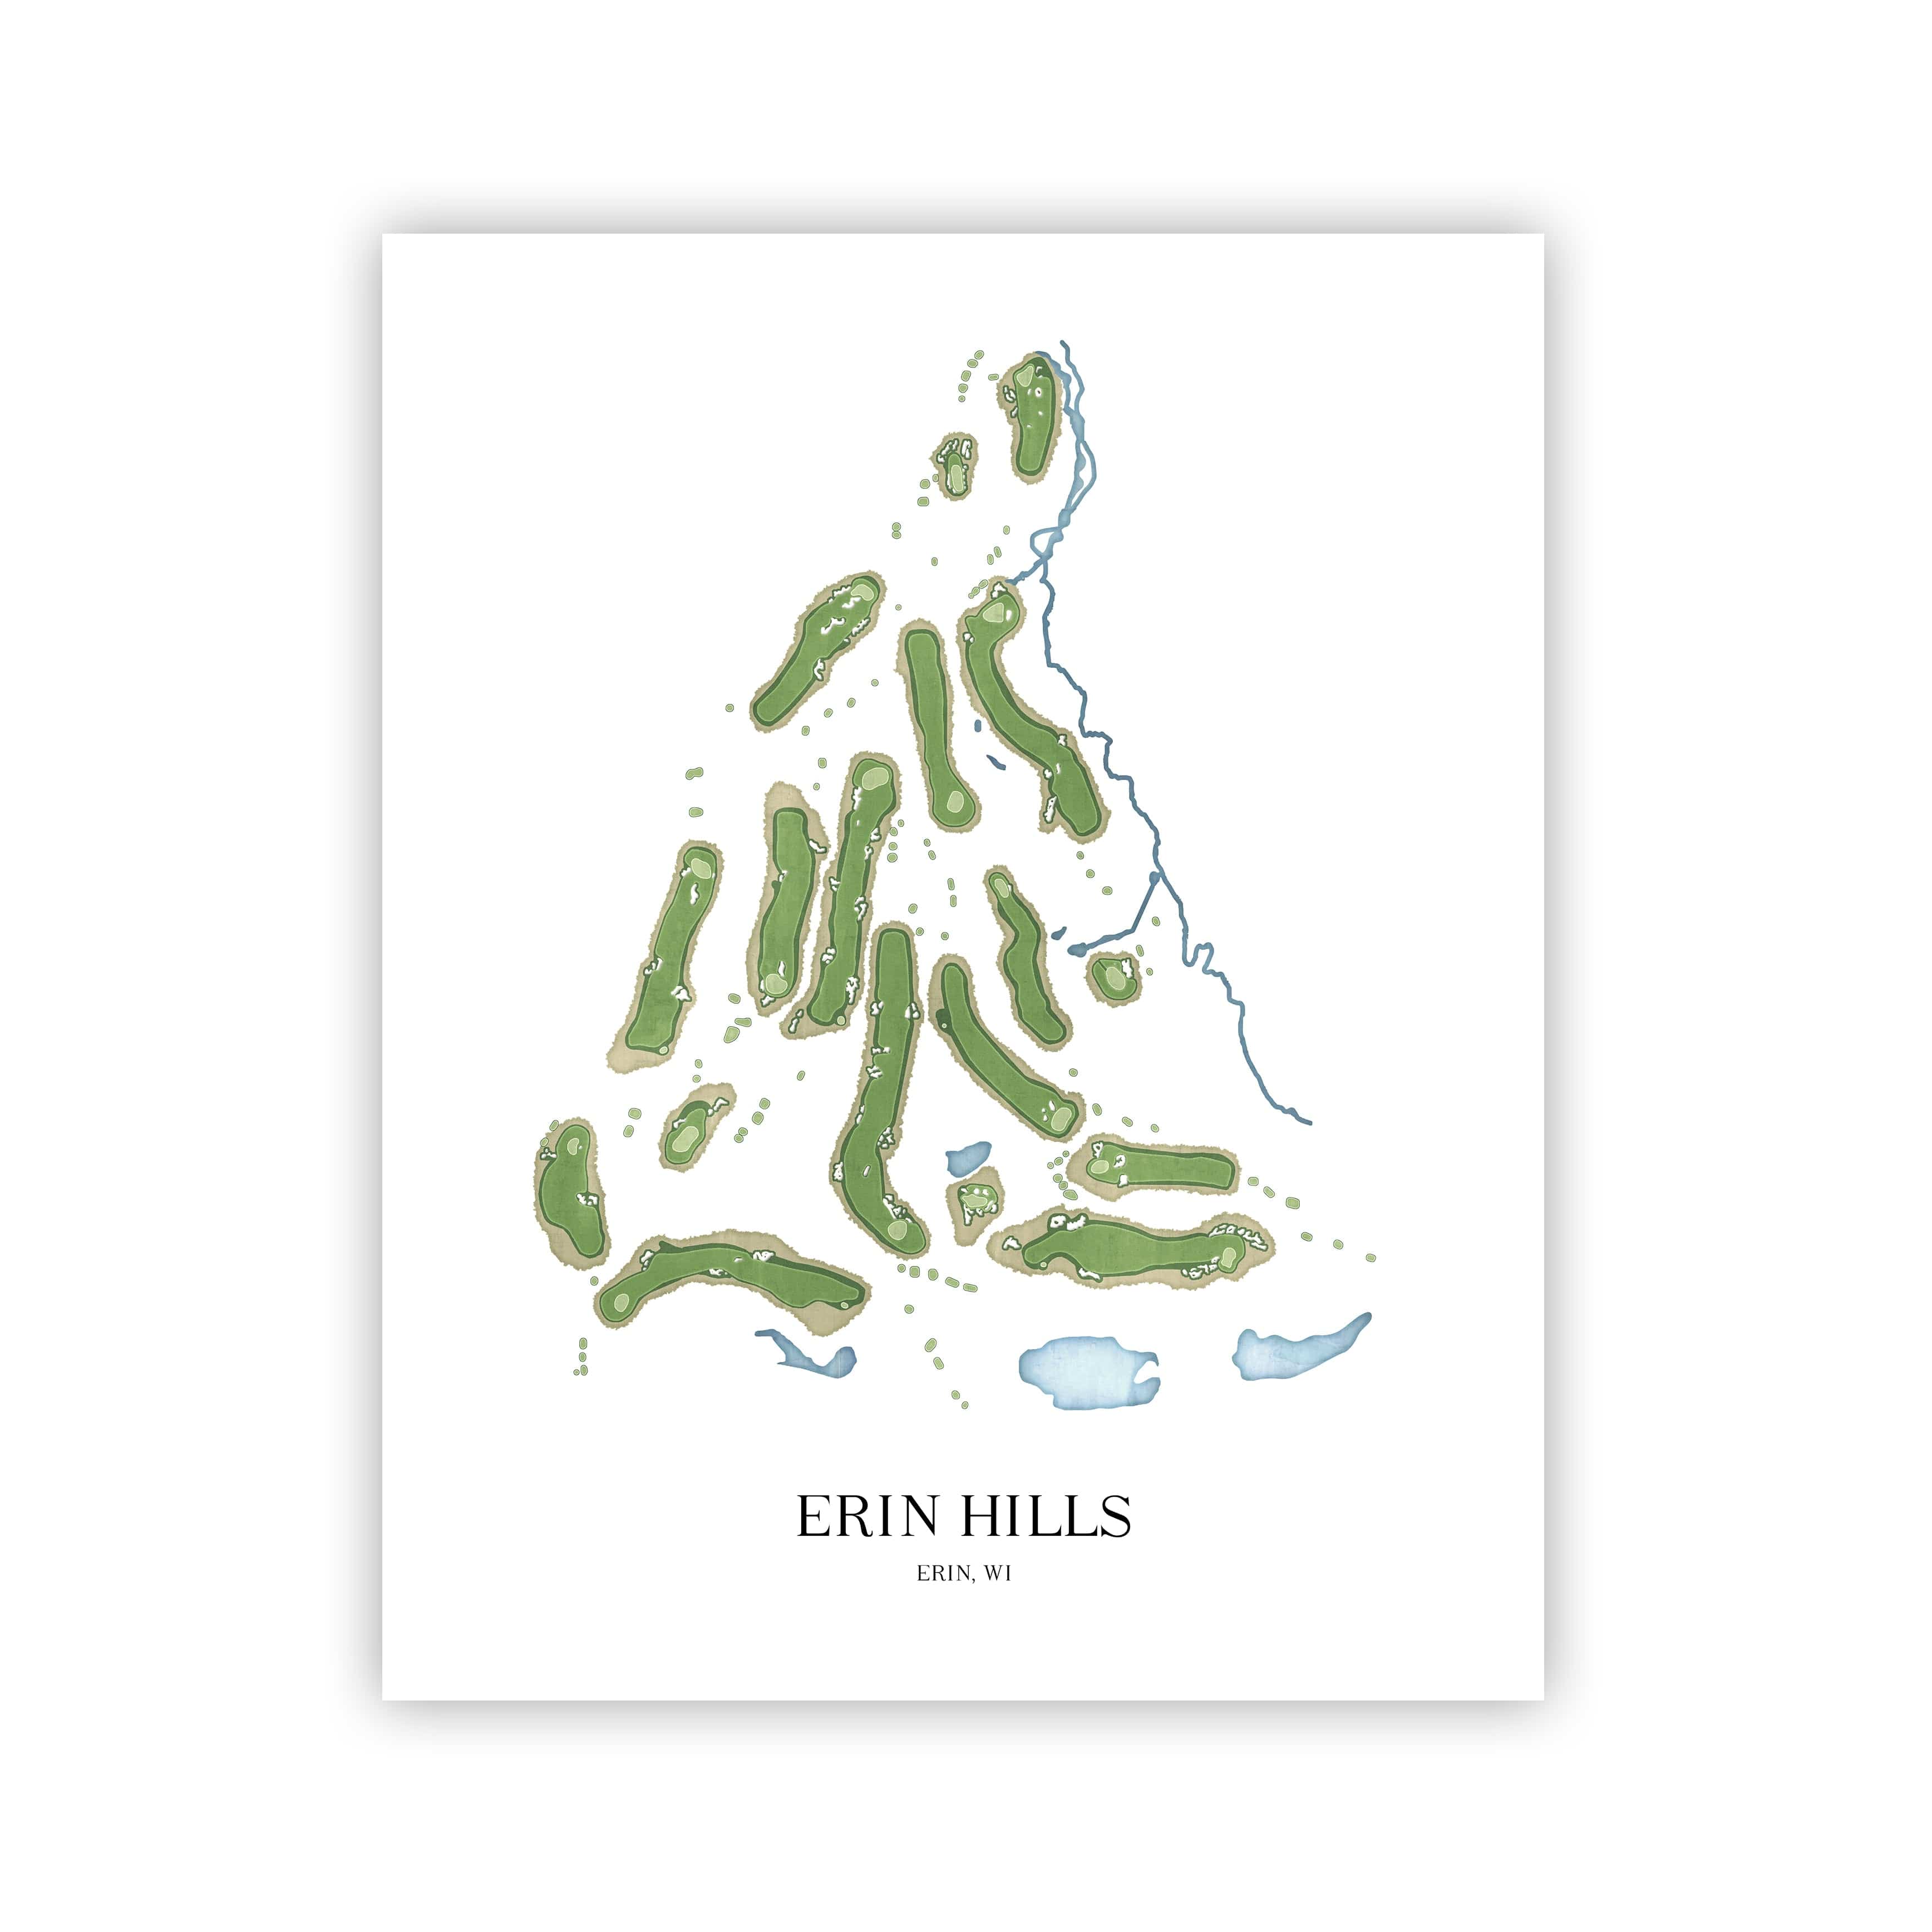 The 19th Hole Golf Shop - Golf Course Prints -  8" x 10" / No Frame Erin Hills Golf Course Map